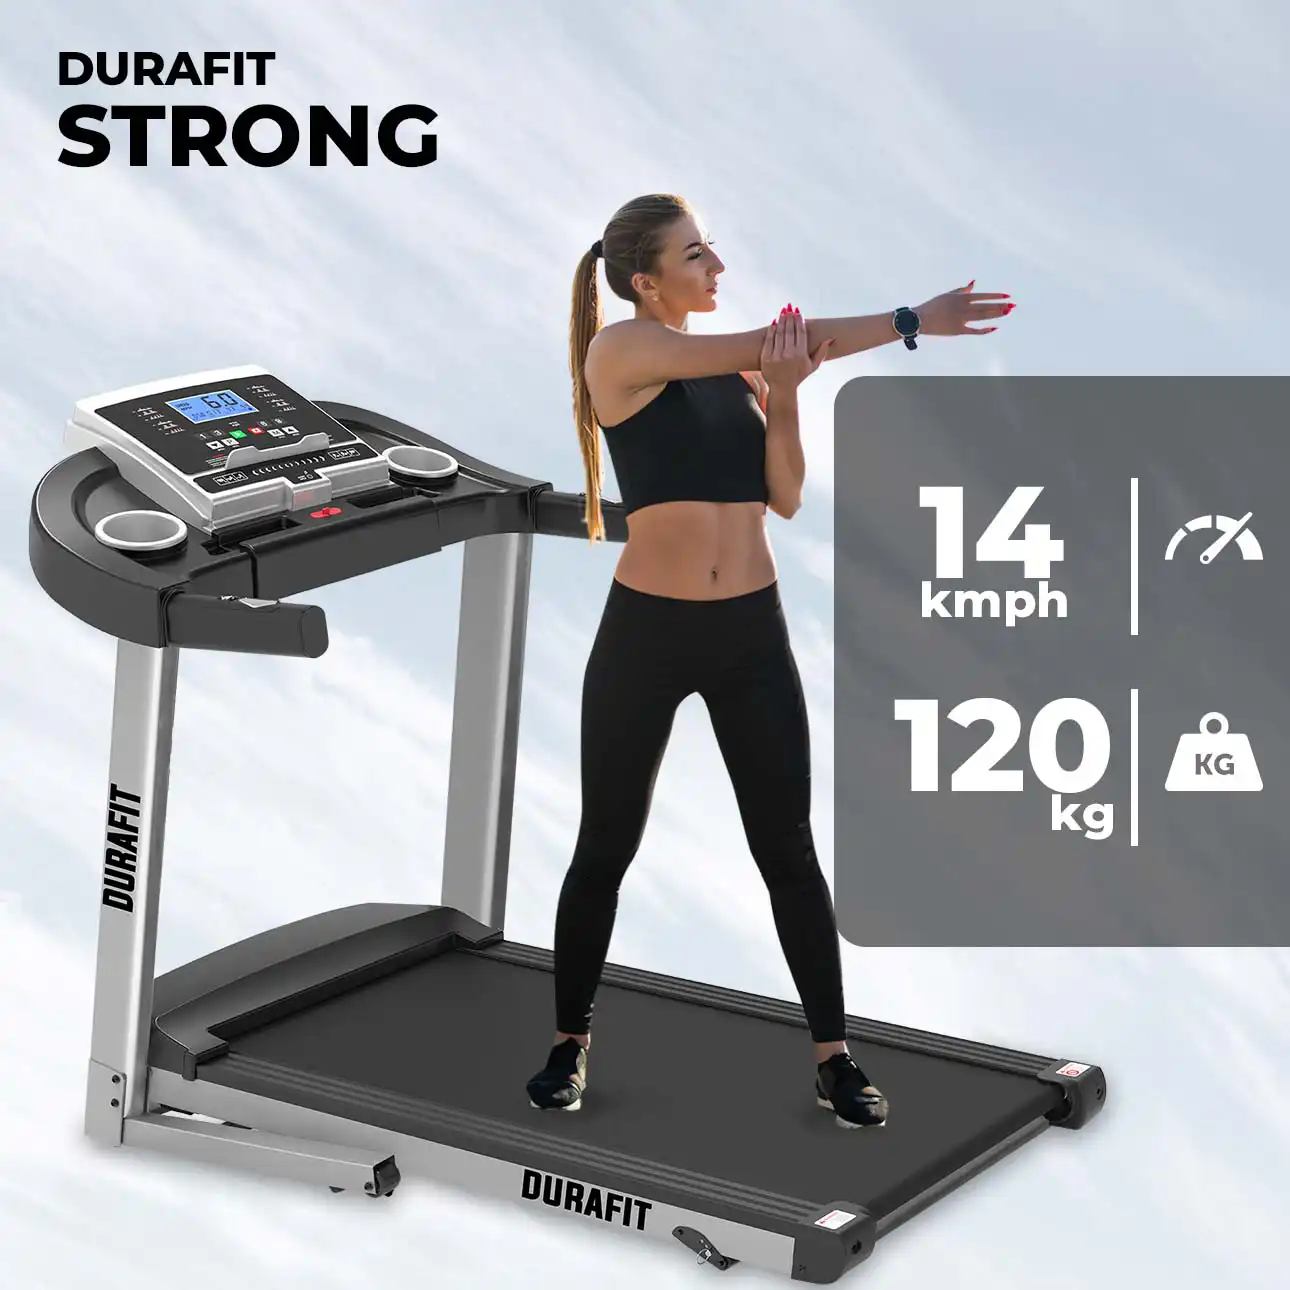 Durafit Strong treadmill with max 14kmph 